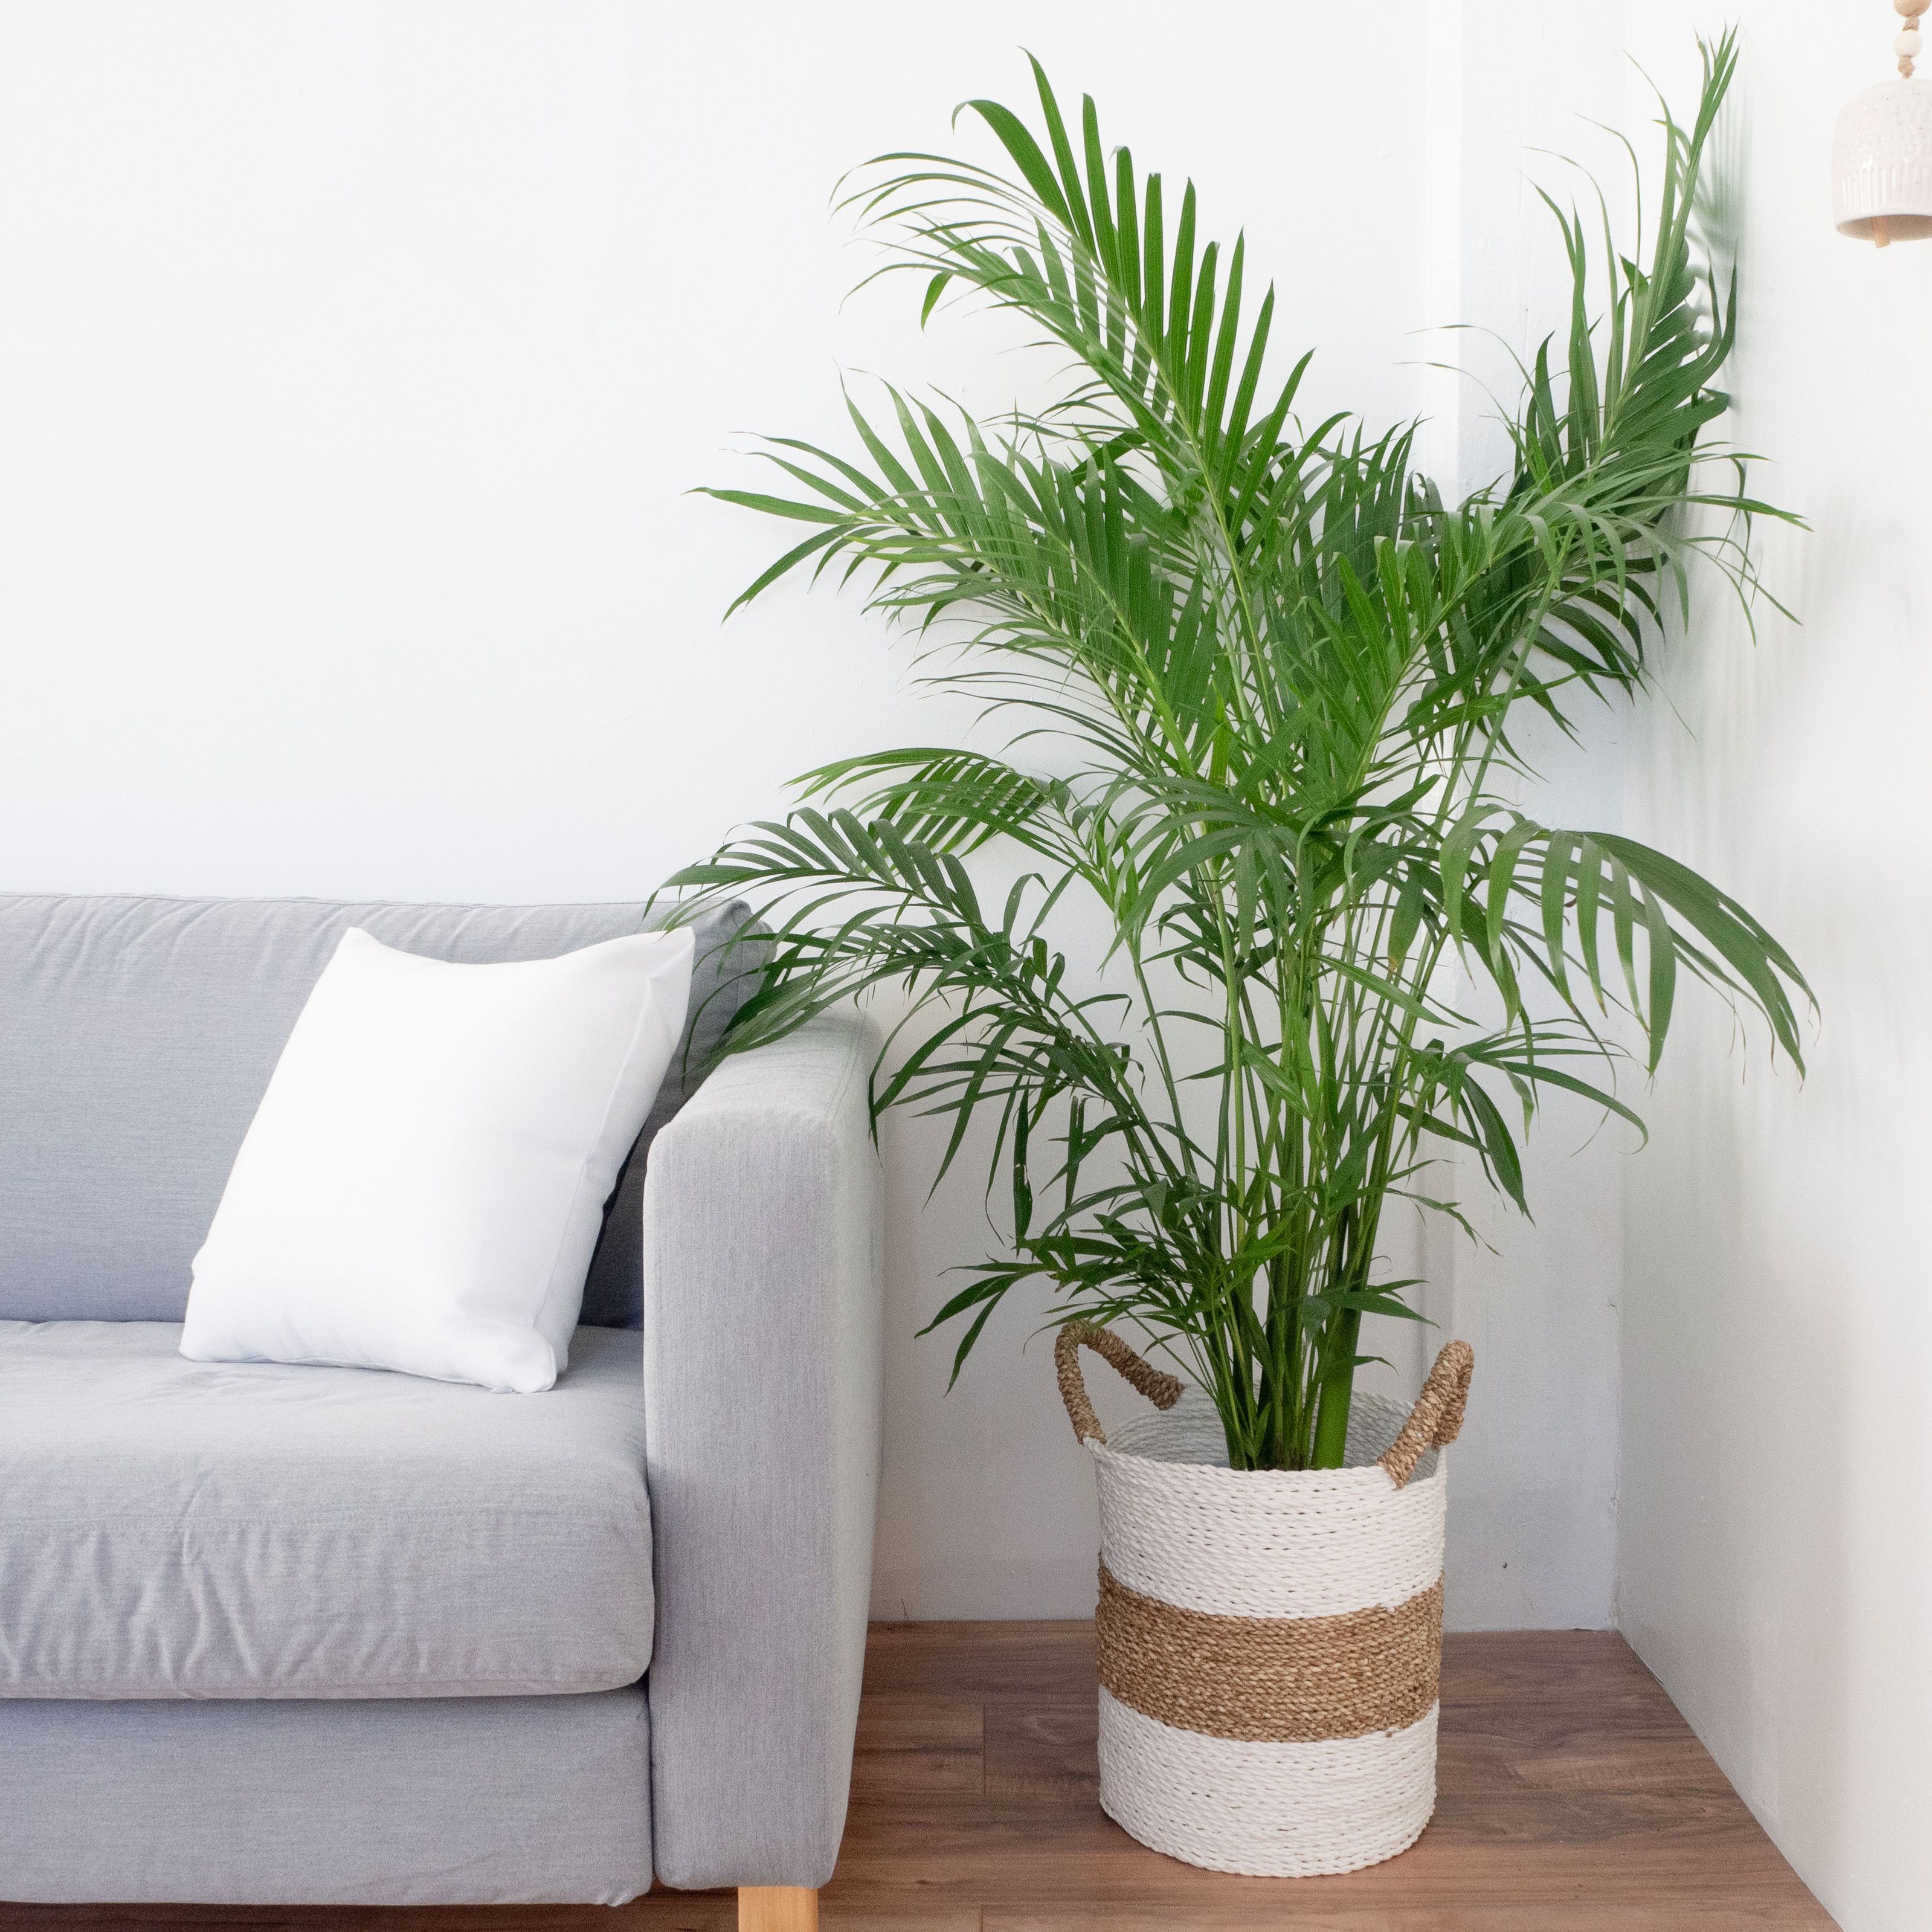 The 26 most beautiful trees to grow as houseplants in your living space - 213